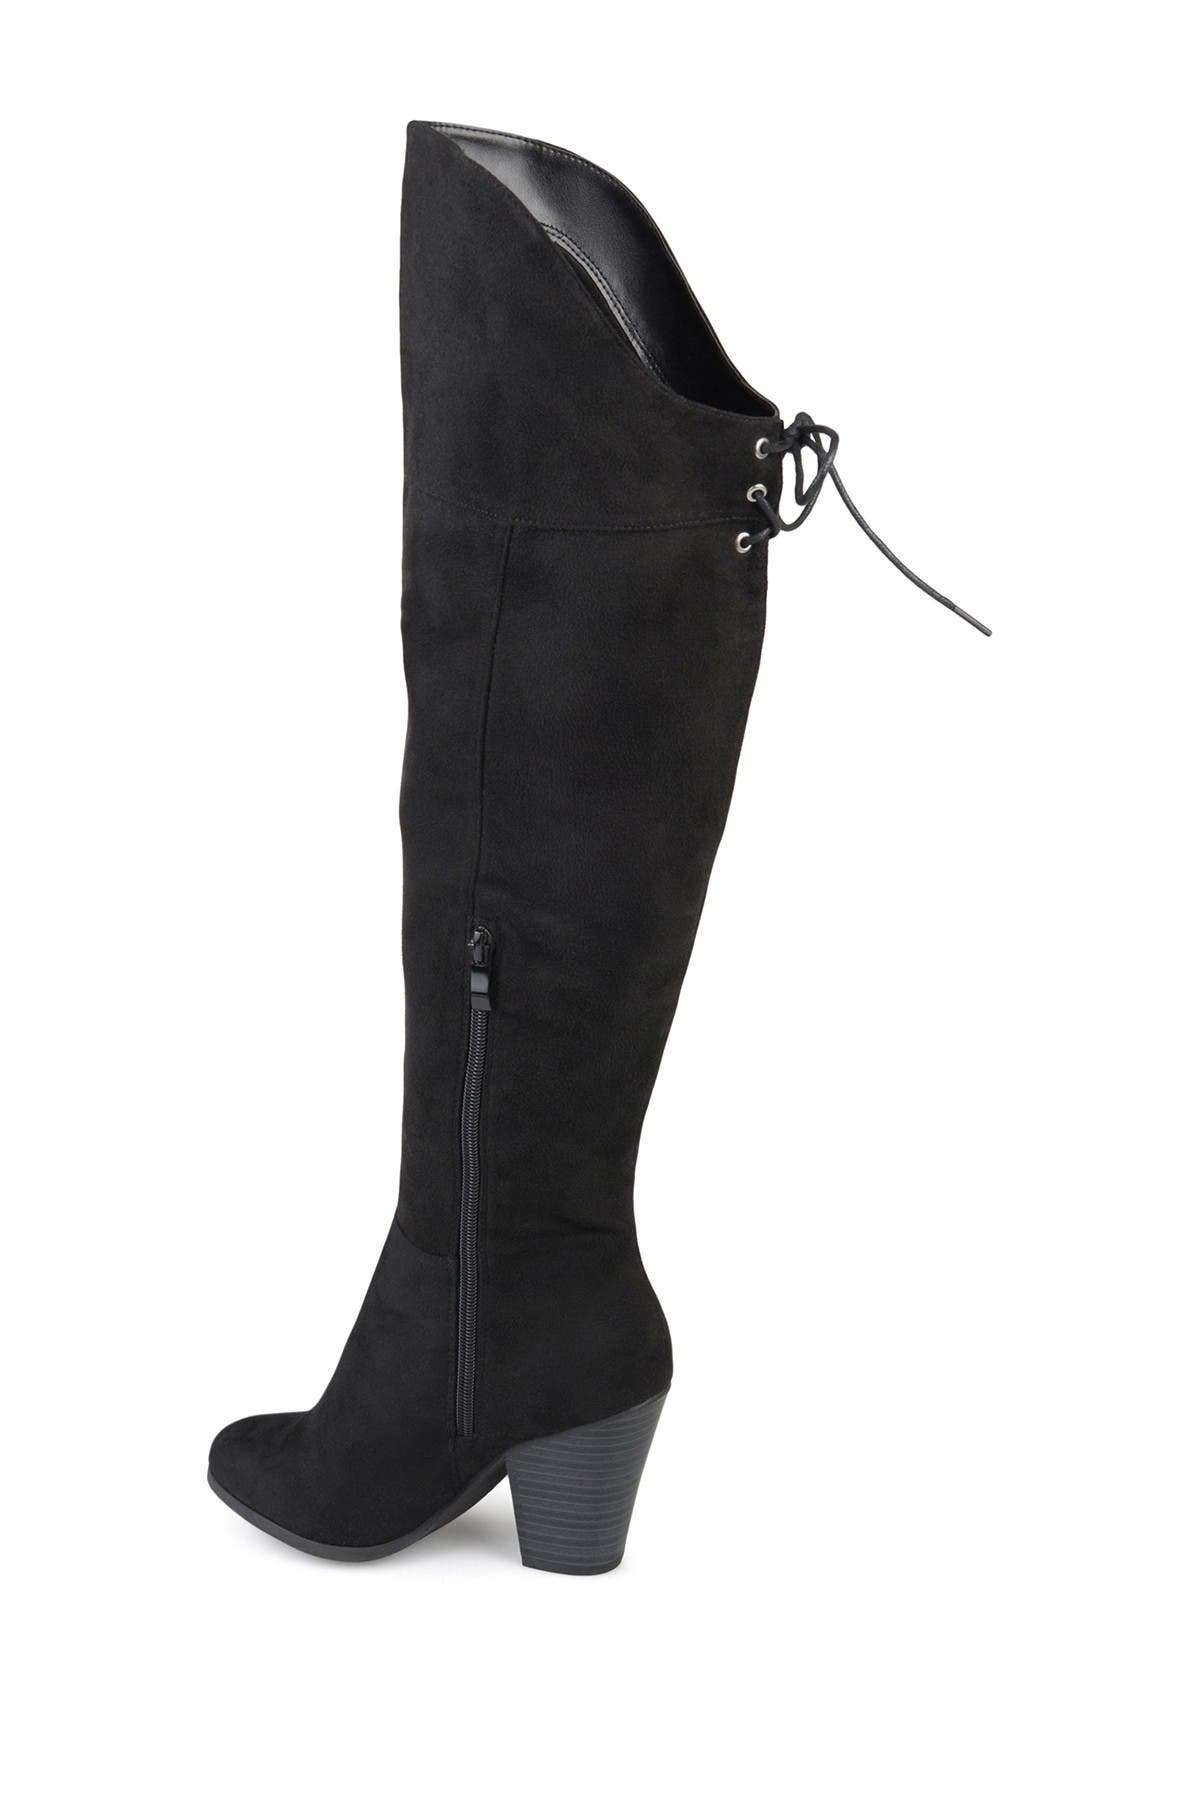 lace up over the knee boots wide calf